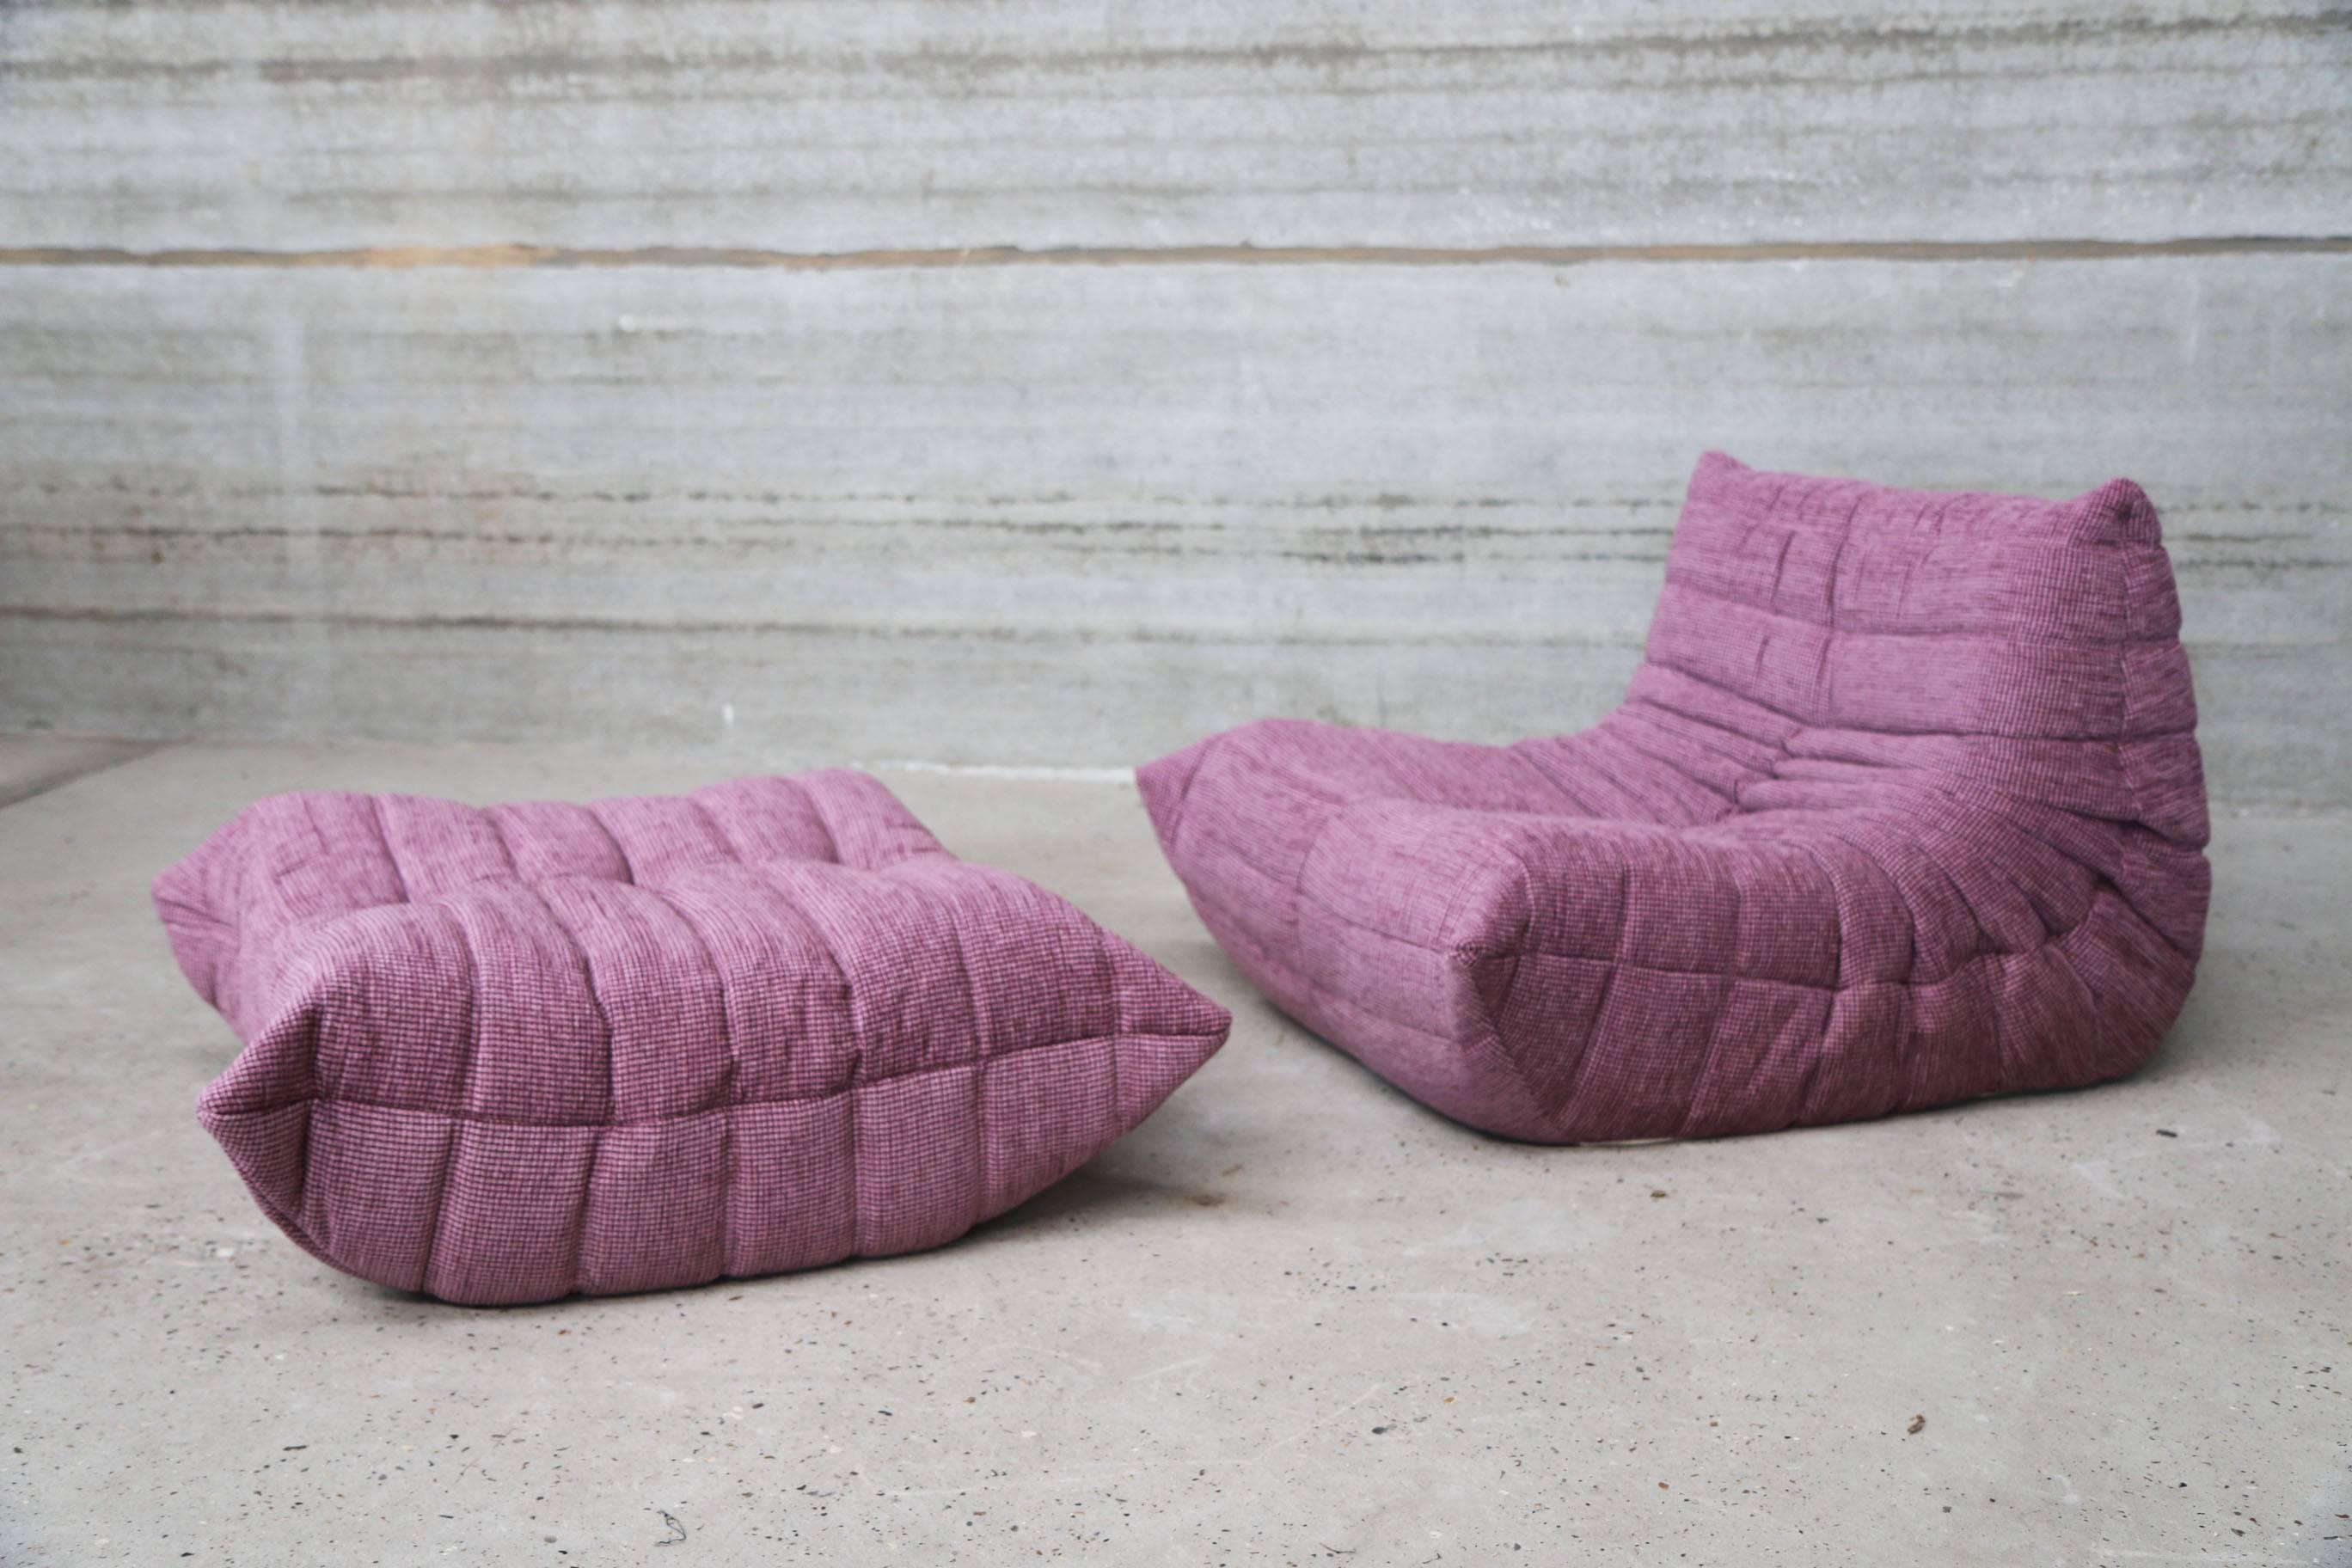 Refurbished in pink fabric by funkyvintage, Belgium.
Top quality work.
look other listings for more matching modules.

Measures: Lounge chair: 70cm x 87cm x 102cm.
Pouf: 30cm x 87cm x 102cm.